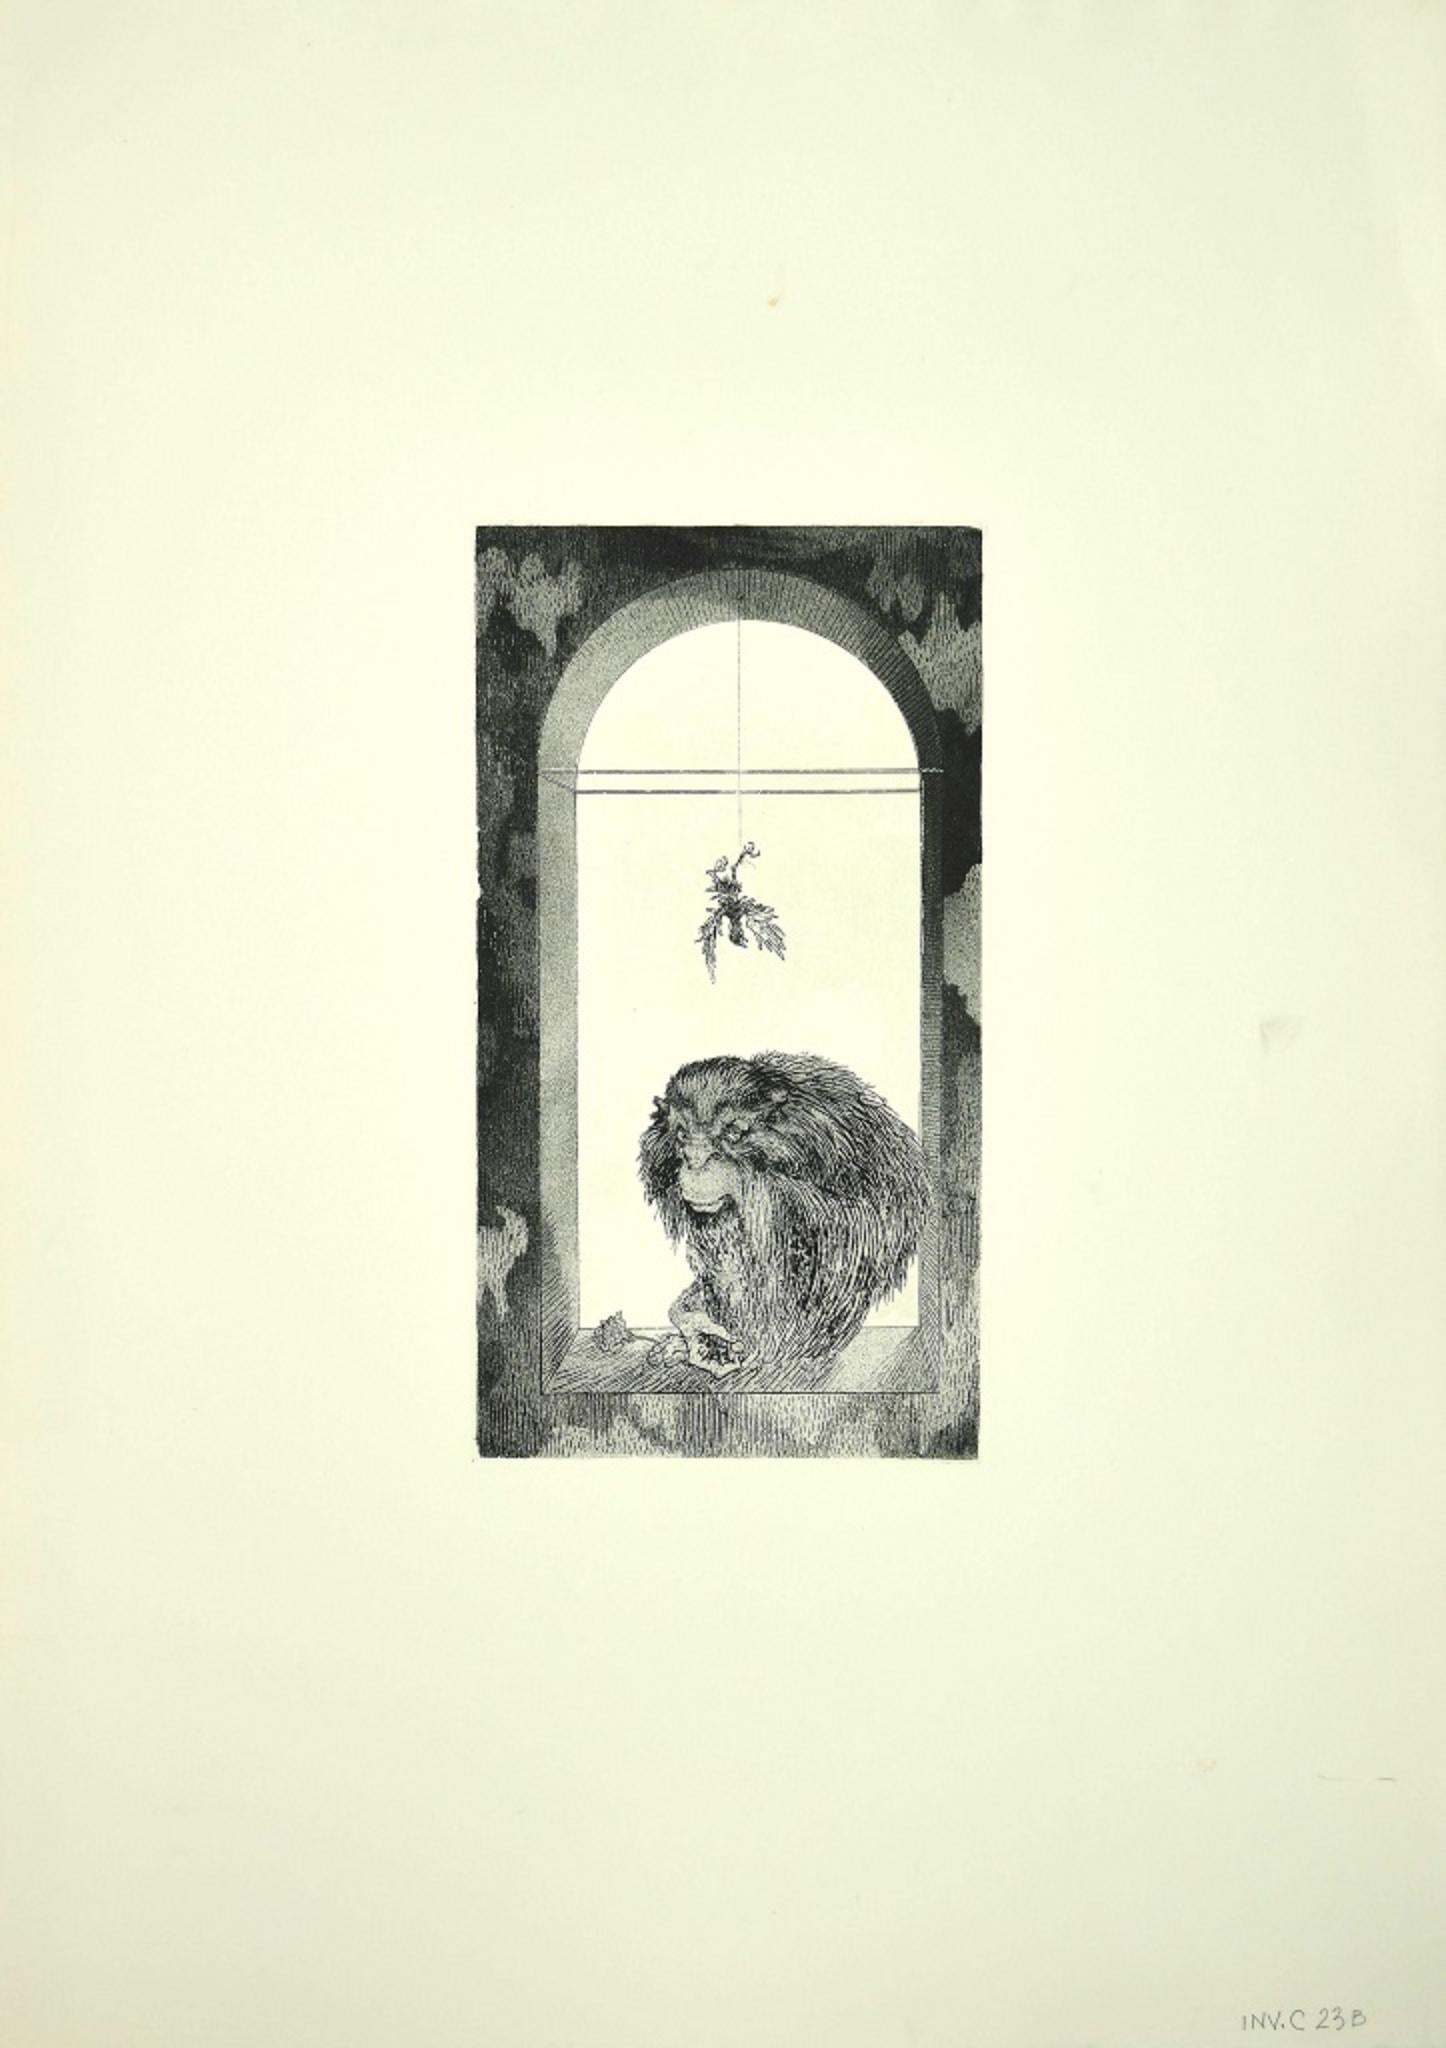 The Monkey is a Contemporary artwork realized in the 1970s by the italian artist Leo Guida.

Original Etching on Cardboard.

Mint conditions.   Image Dimensions: 32 x 0.1 x 17 cm.

Leo Guida. Sensitive to current issues, artistic movements and